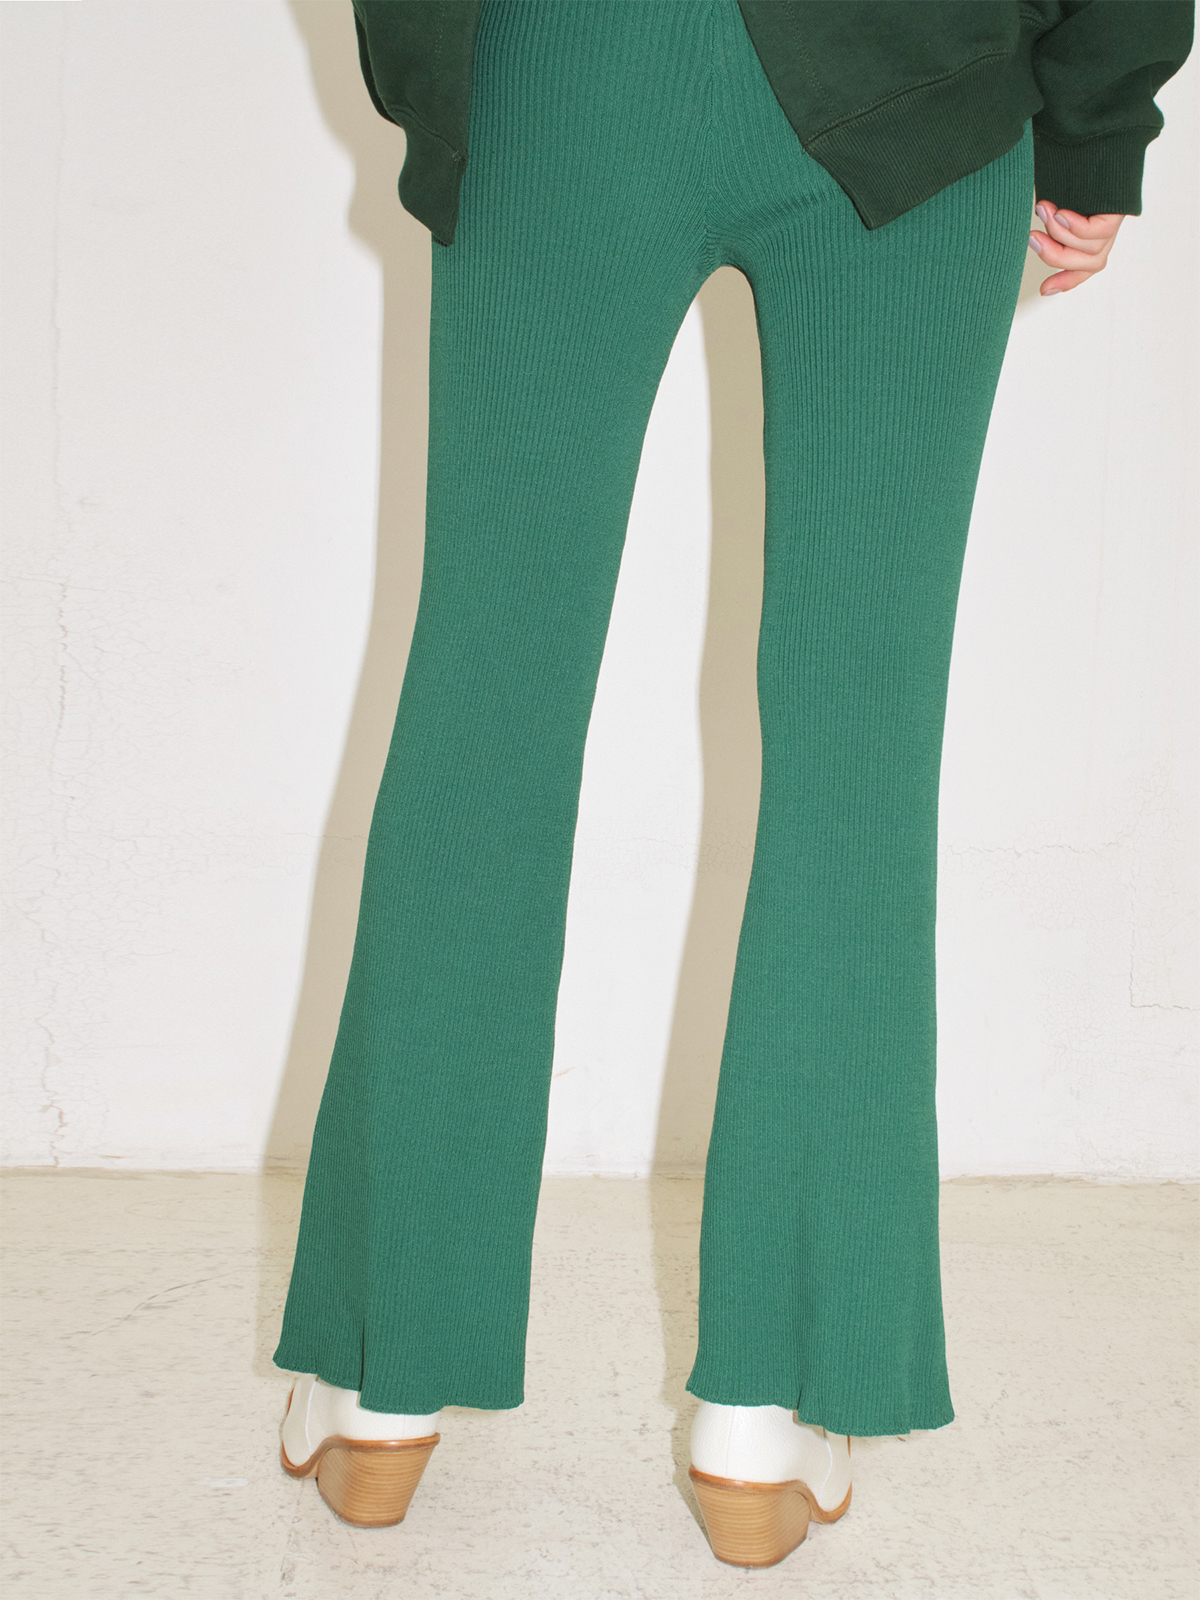 colored stitch slit knit trousers / green